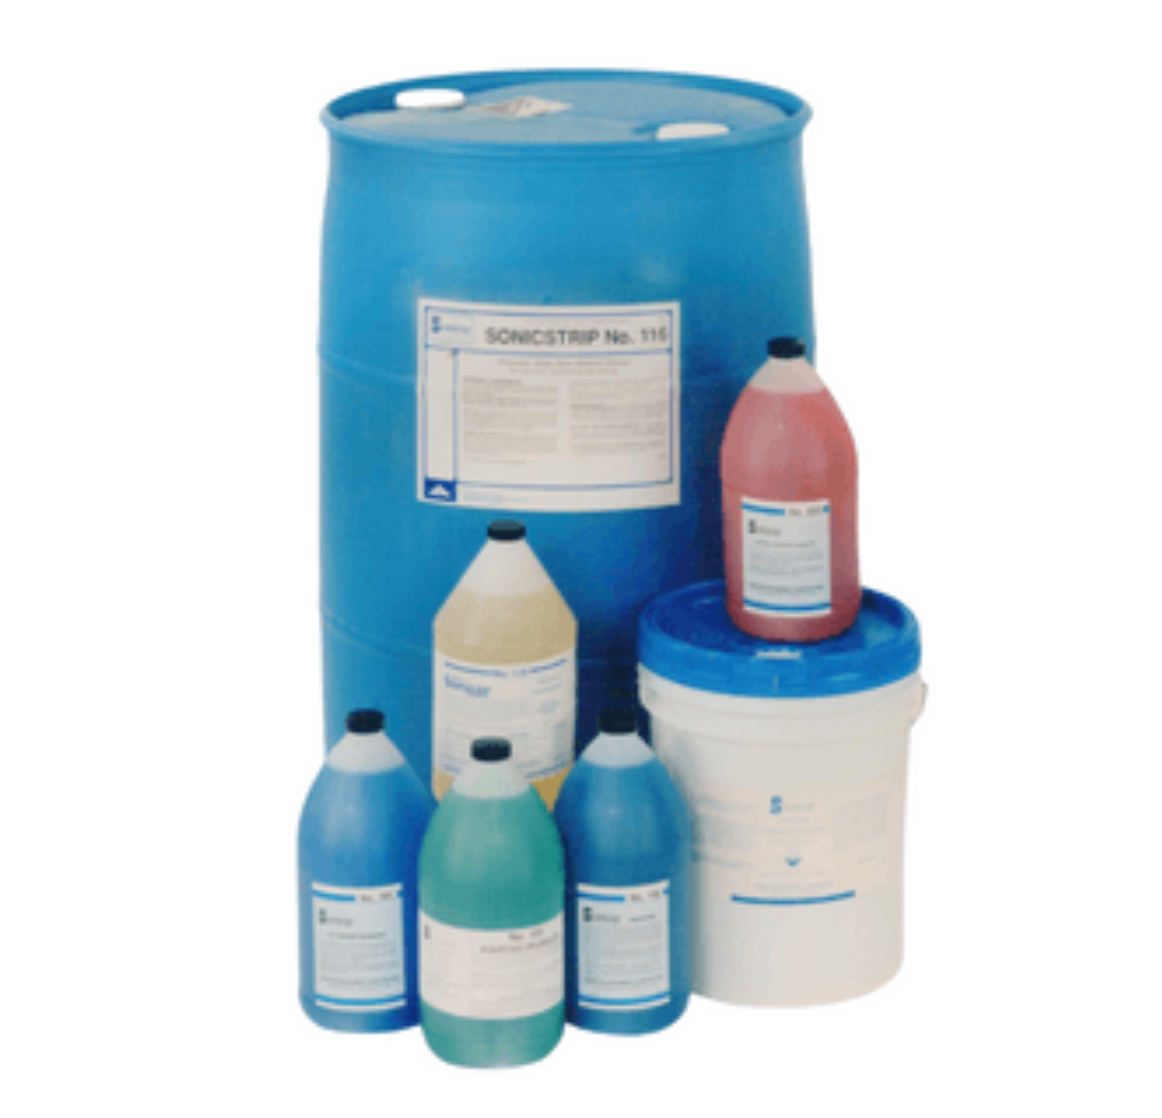 sonicor-sonichem-103-aqueous-degreaser-cleaning-solution-55-gal-drum